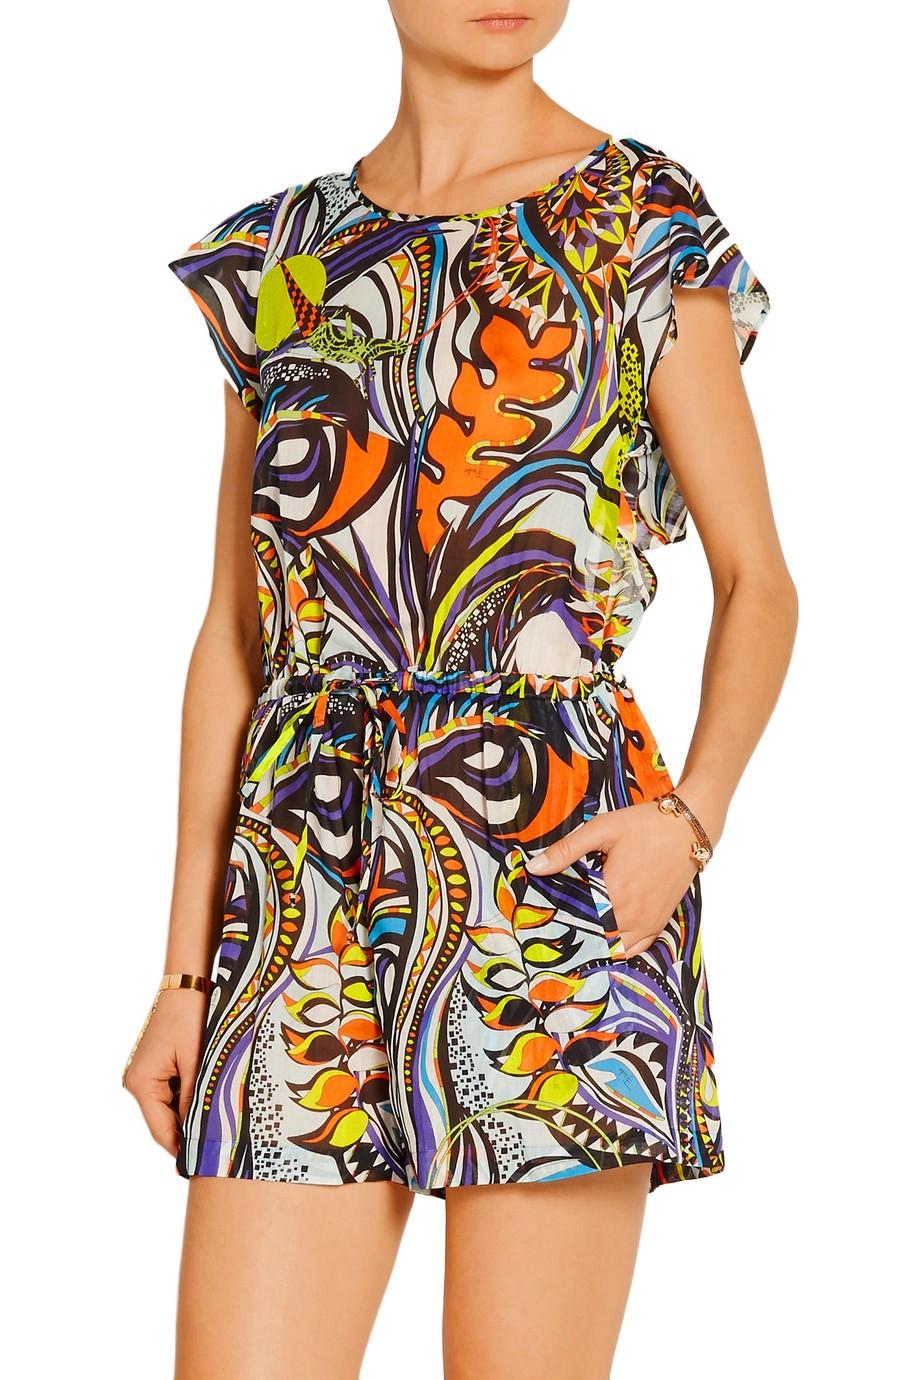 Emilio Pucci's playsuit is decorated with the label's tropical print in bright orange, purple and chartreuse hues. It's crafted from lightweight cotton-voile and has a fluttering cape-effect overlay at the open back. Use the drawstring to cinch the